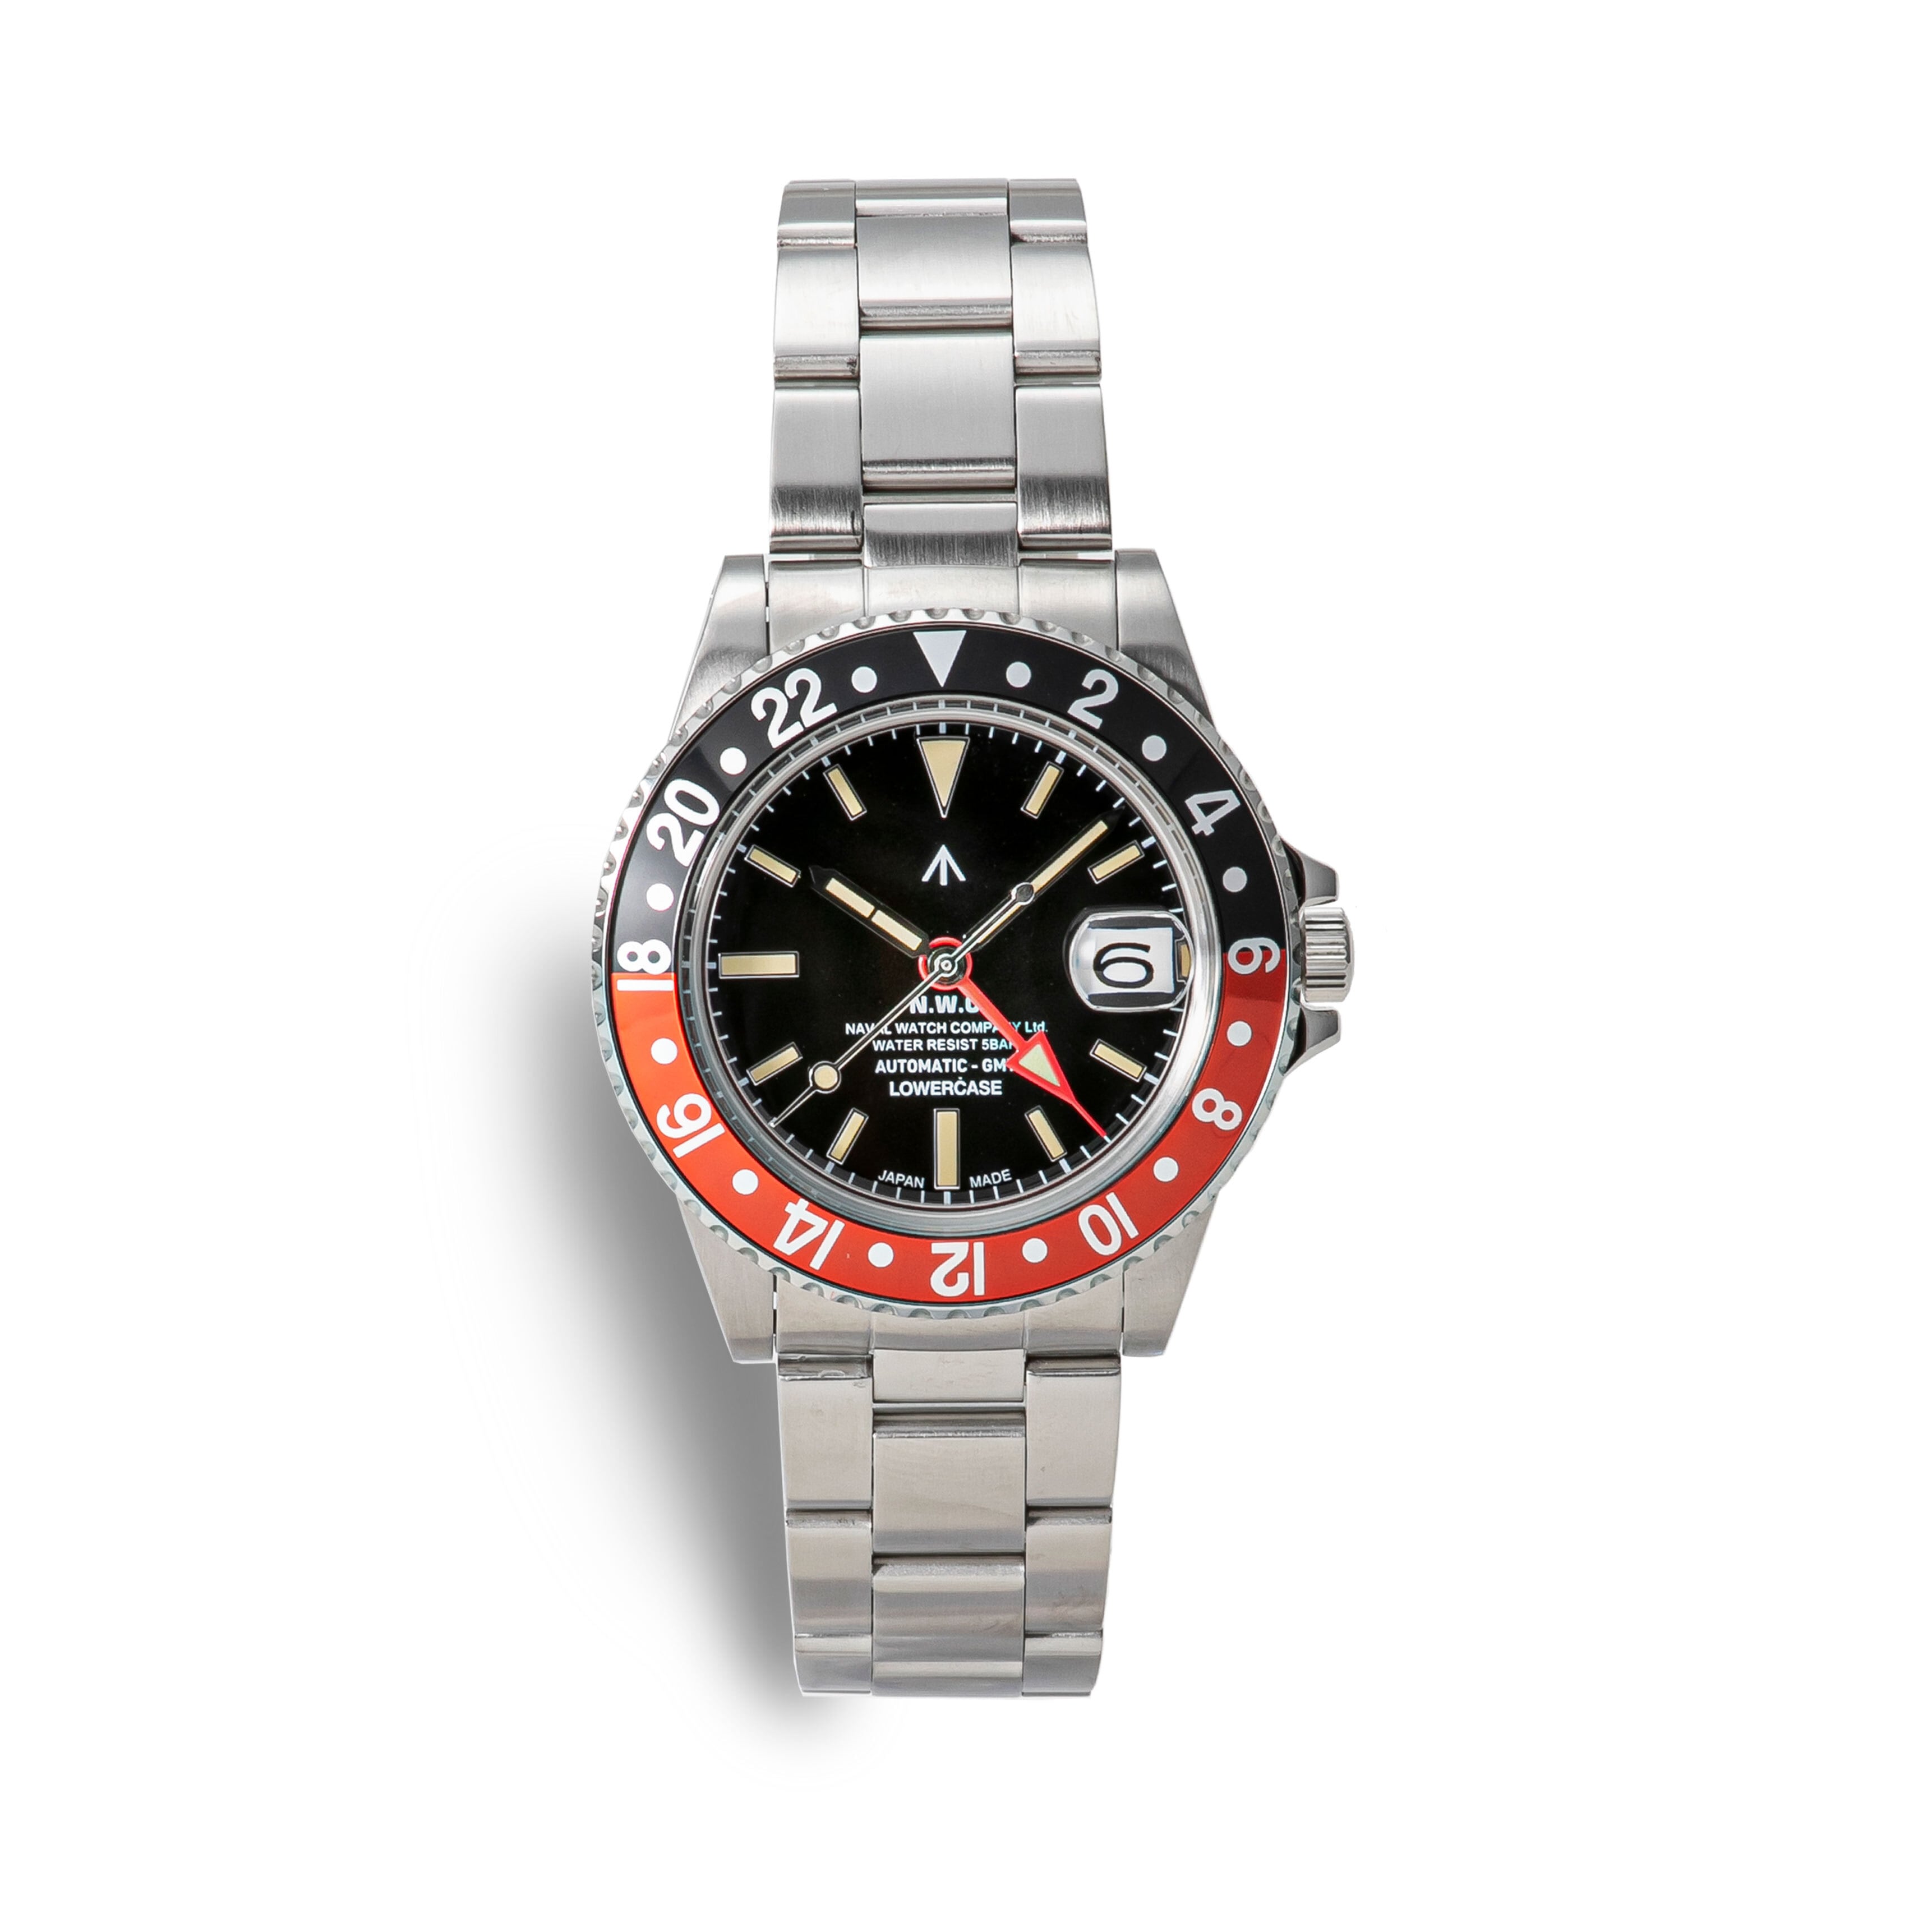 Naval Watch Produced By LOWERCASE FRXD004 GMT Mechanical S/S 3 ...